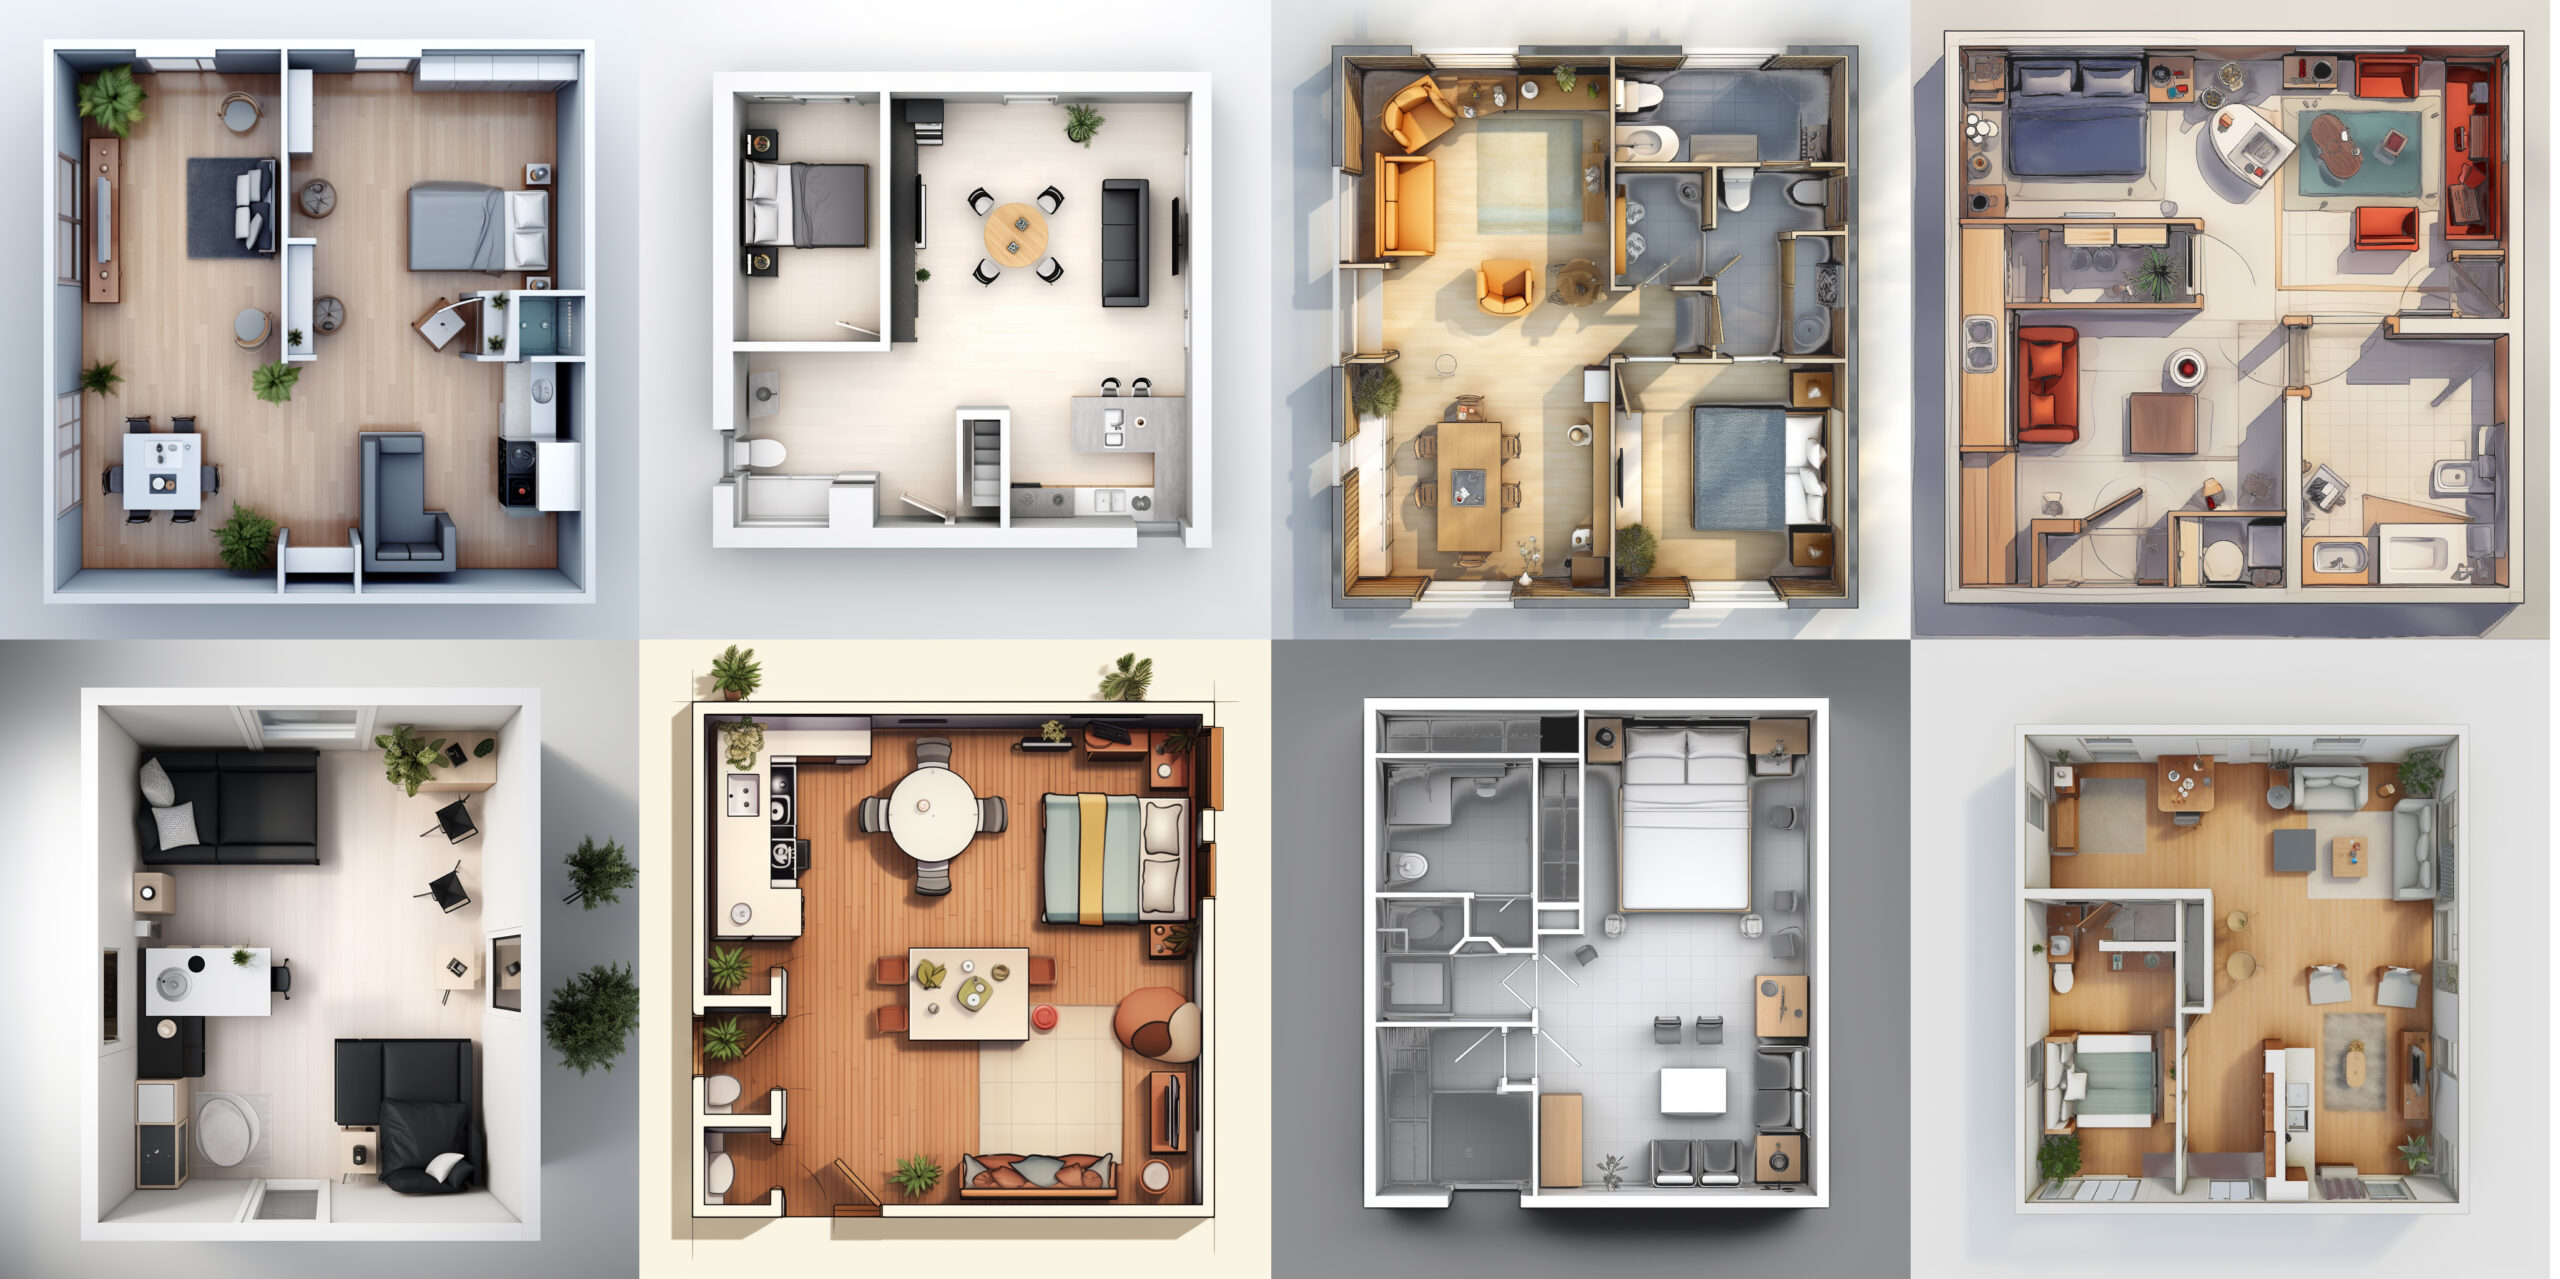 Home Design 3D - The best design app on iOS, Android, PC and Mac !